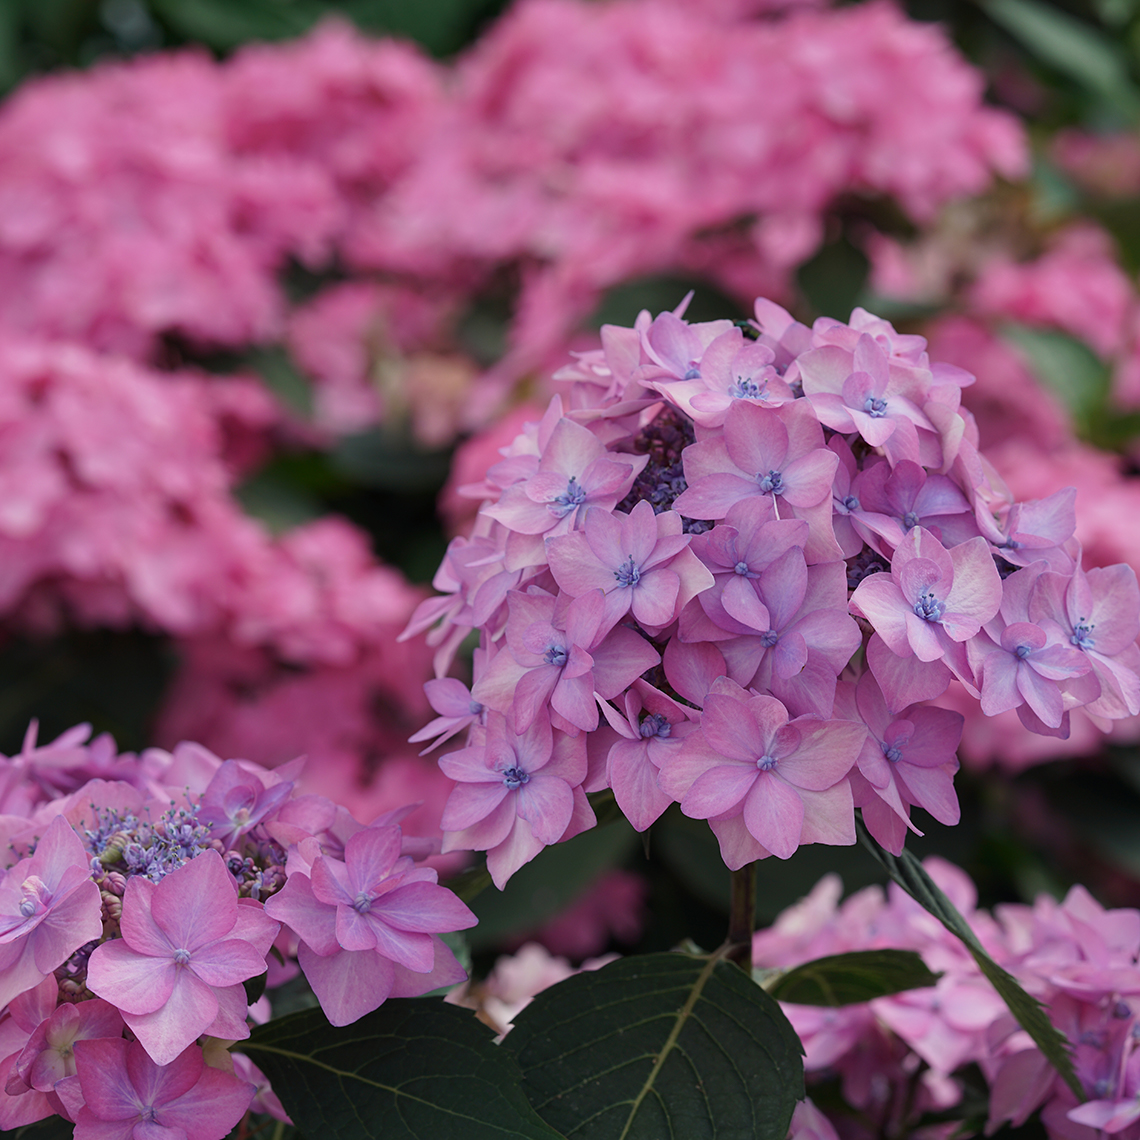 A flower of Let's Dance Cancan hydrangea with purple coloration